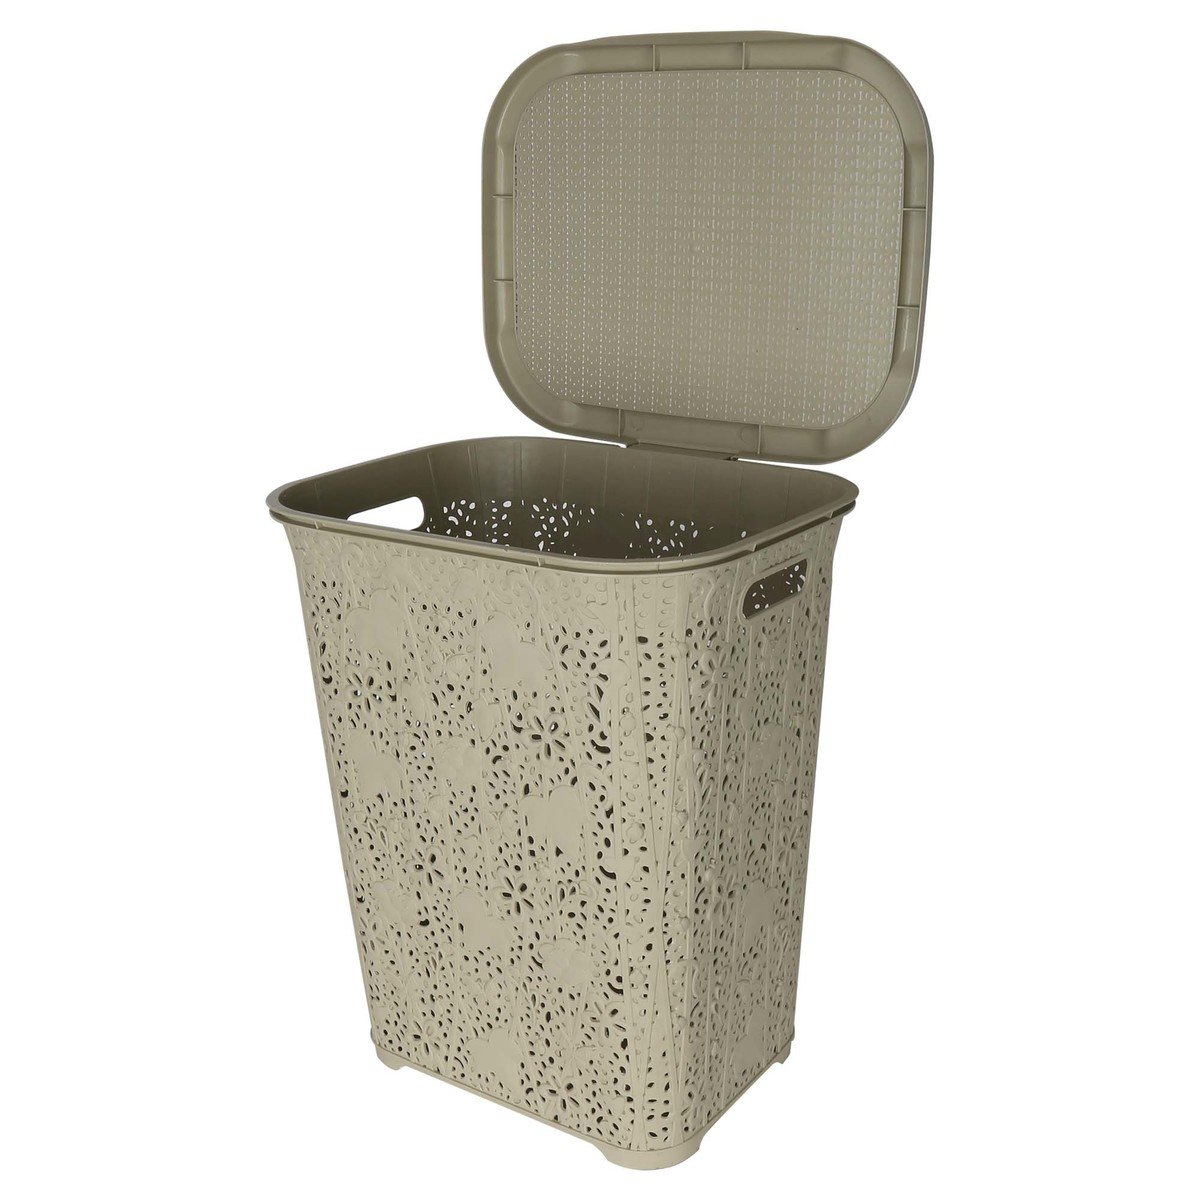 Saglam Lace Laundry Basket with Lid Big 207 Assorted Colors